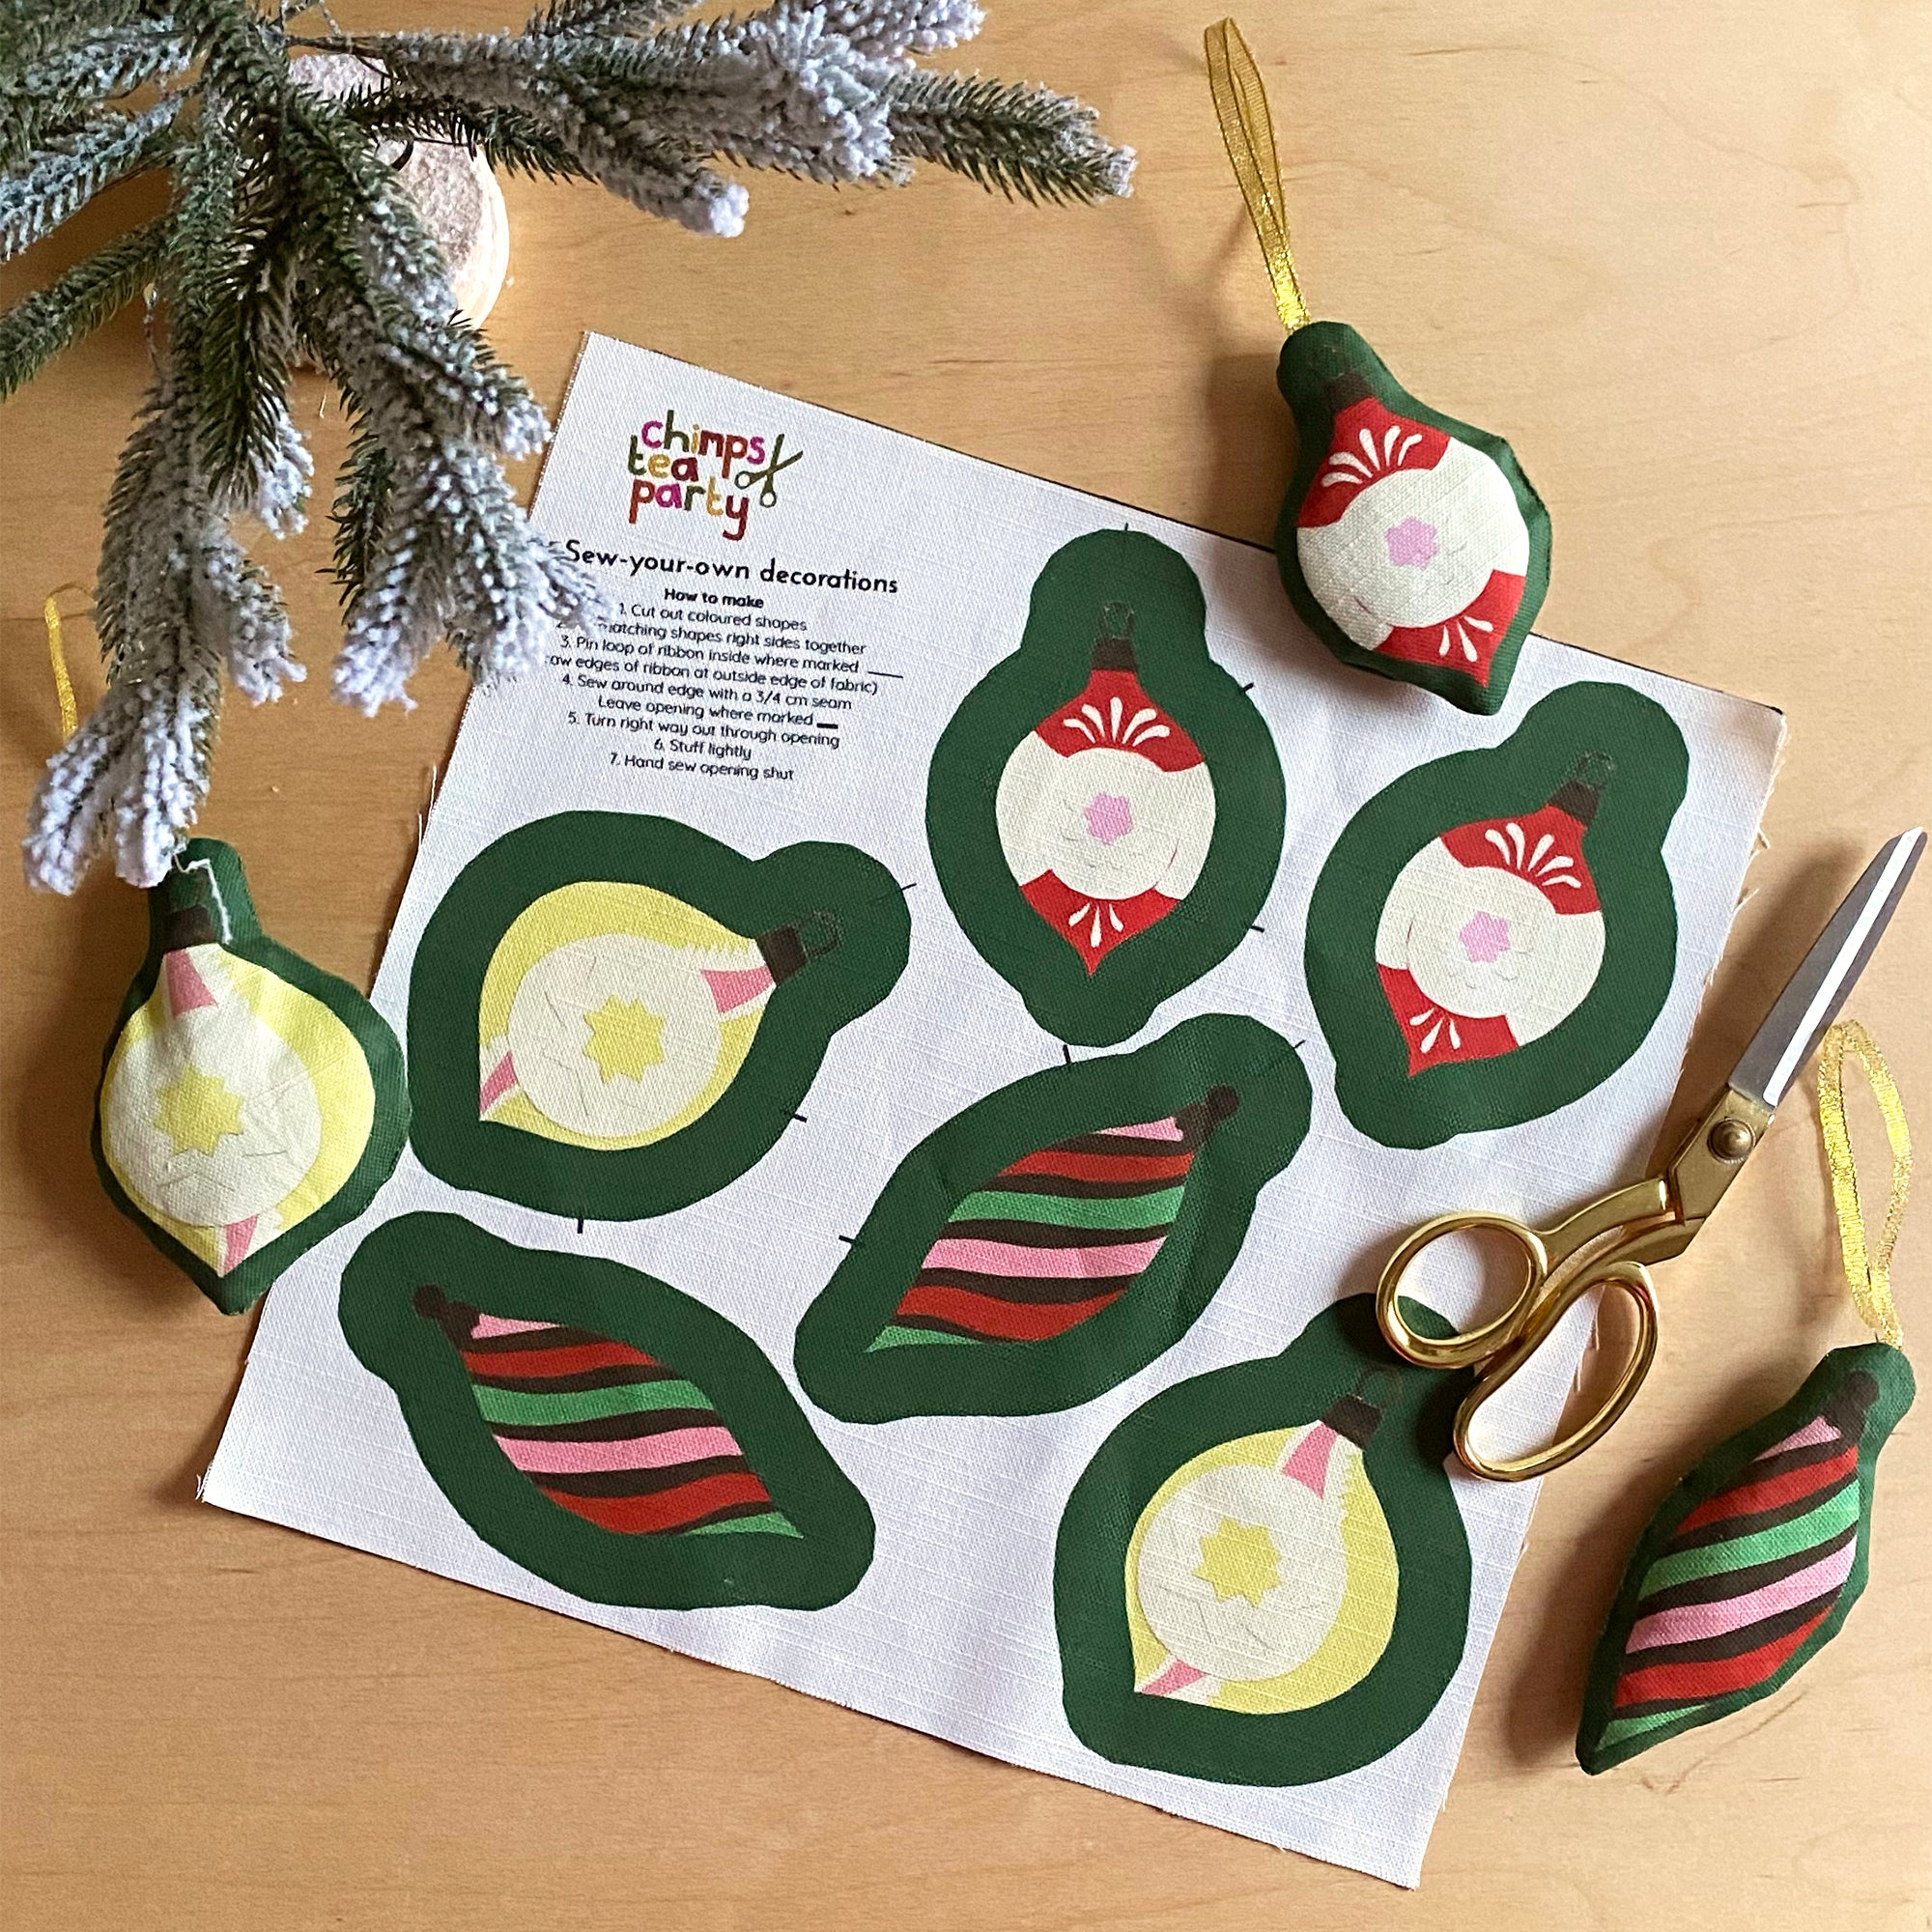 Make Your Own Set of Vintage Bauble Christmas Tree Decorations